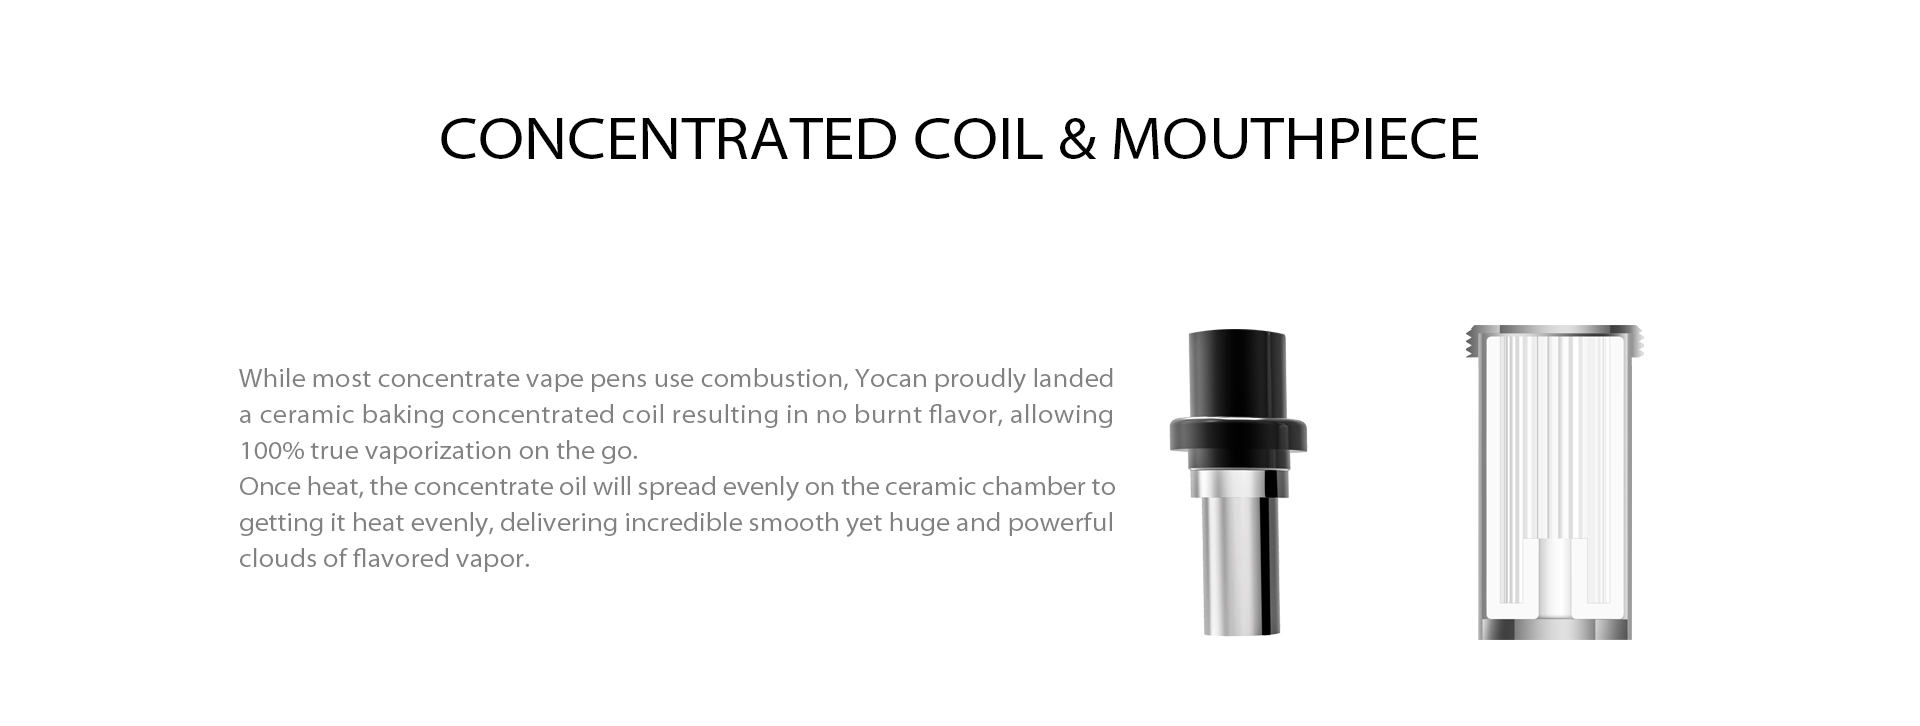 The Yocan Explore Replacement Wax Coil and Mouthpiece